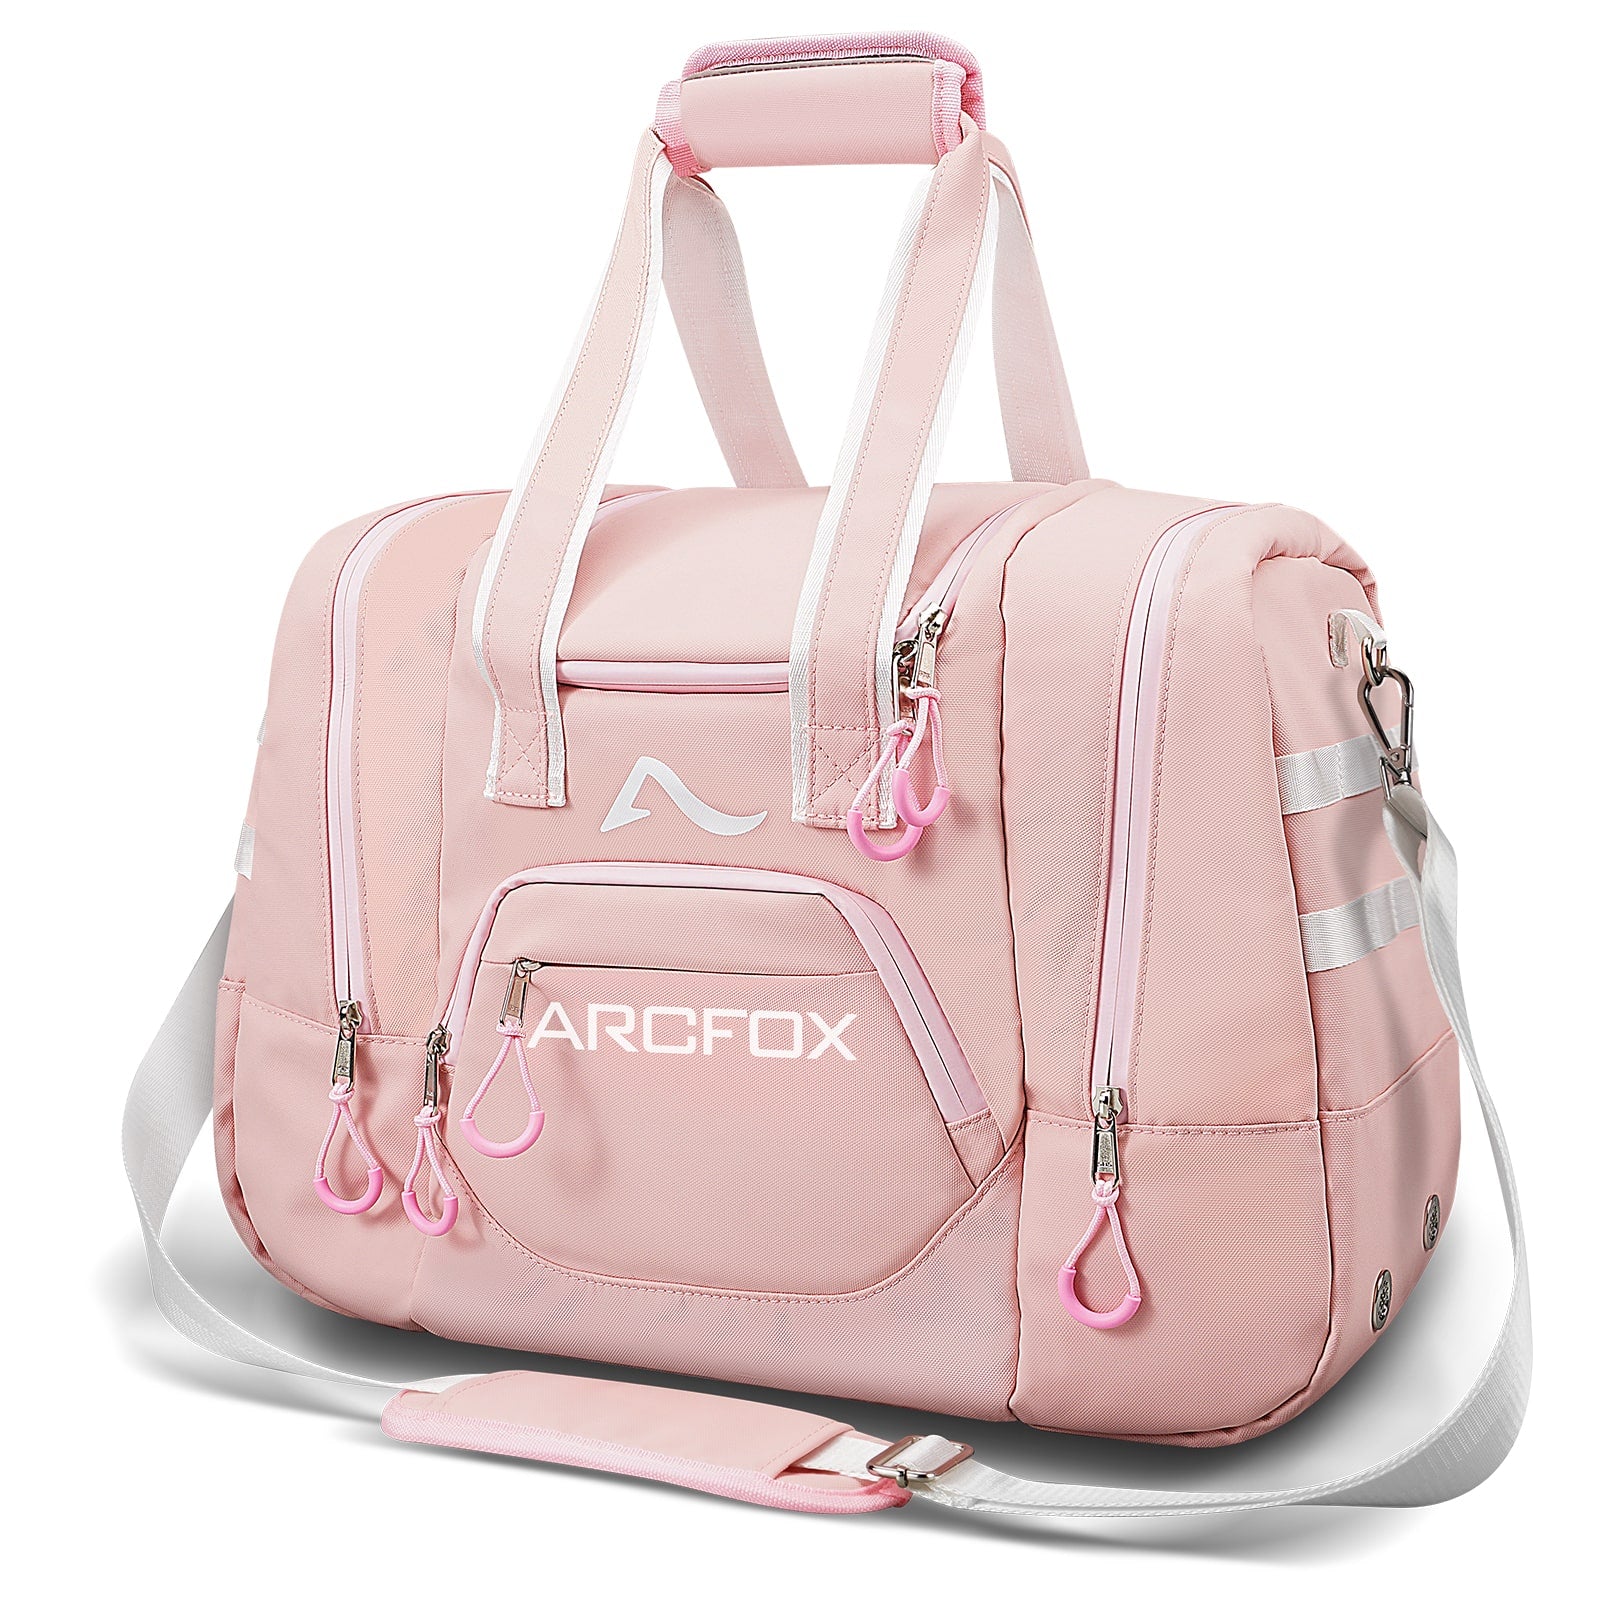 ARCFOX Bowling Bag for Single Ball with Reinforced Ball Holder Straps